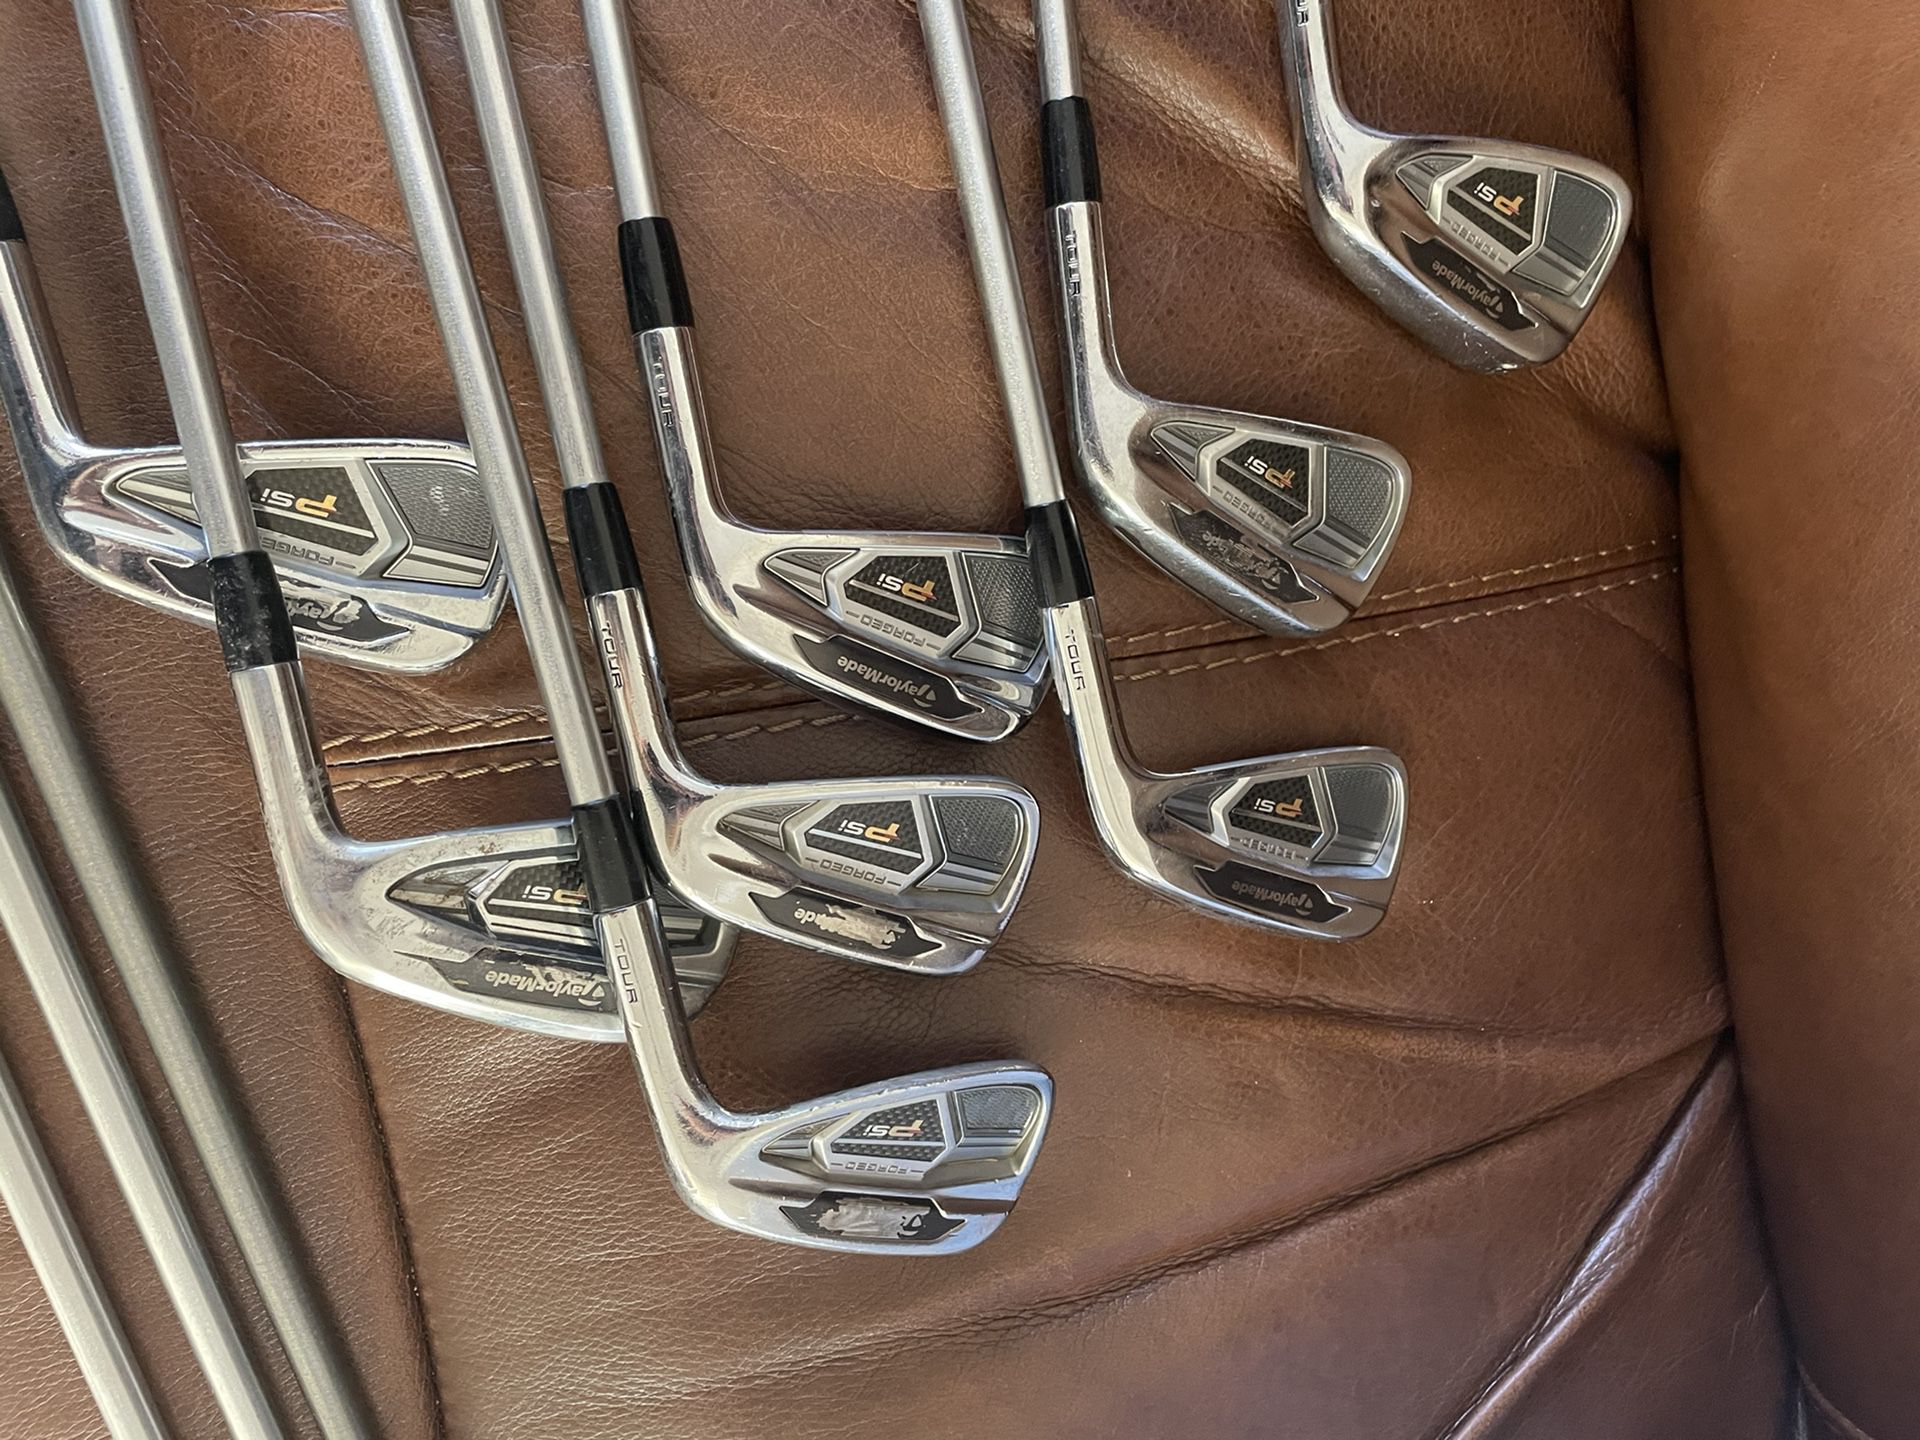 Taylormade PSi Forged 3-9 Vokey 46*|52*|58* Wedges